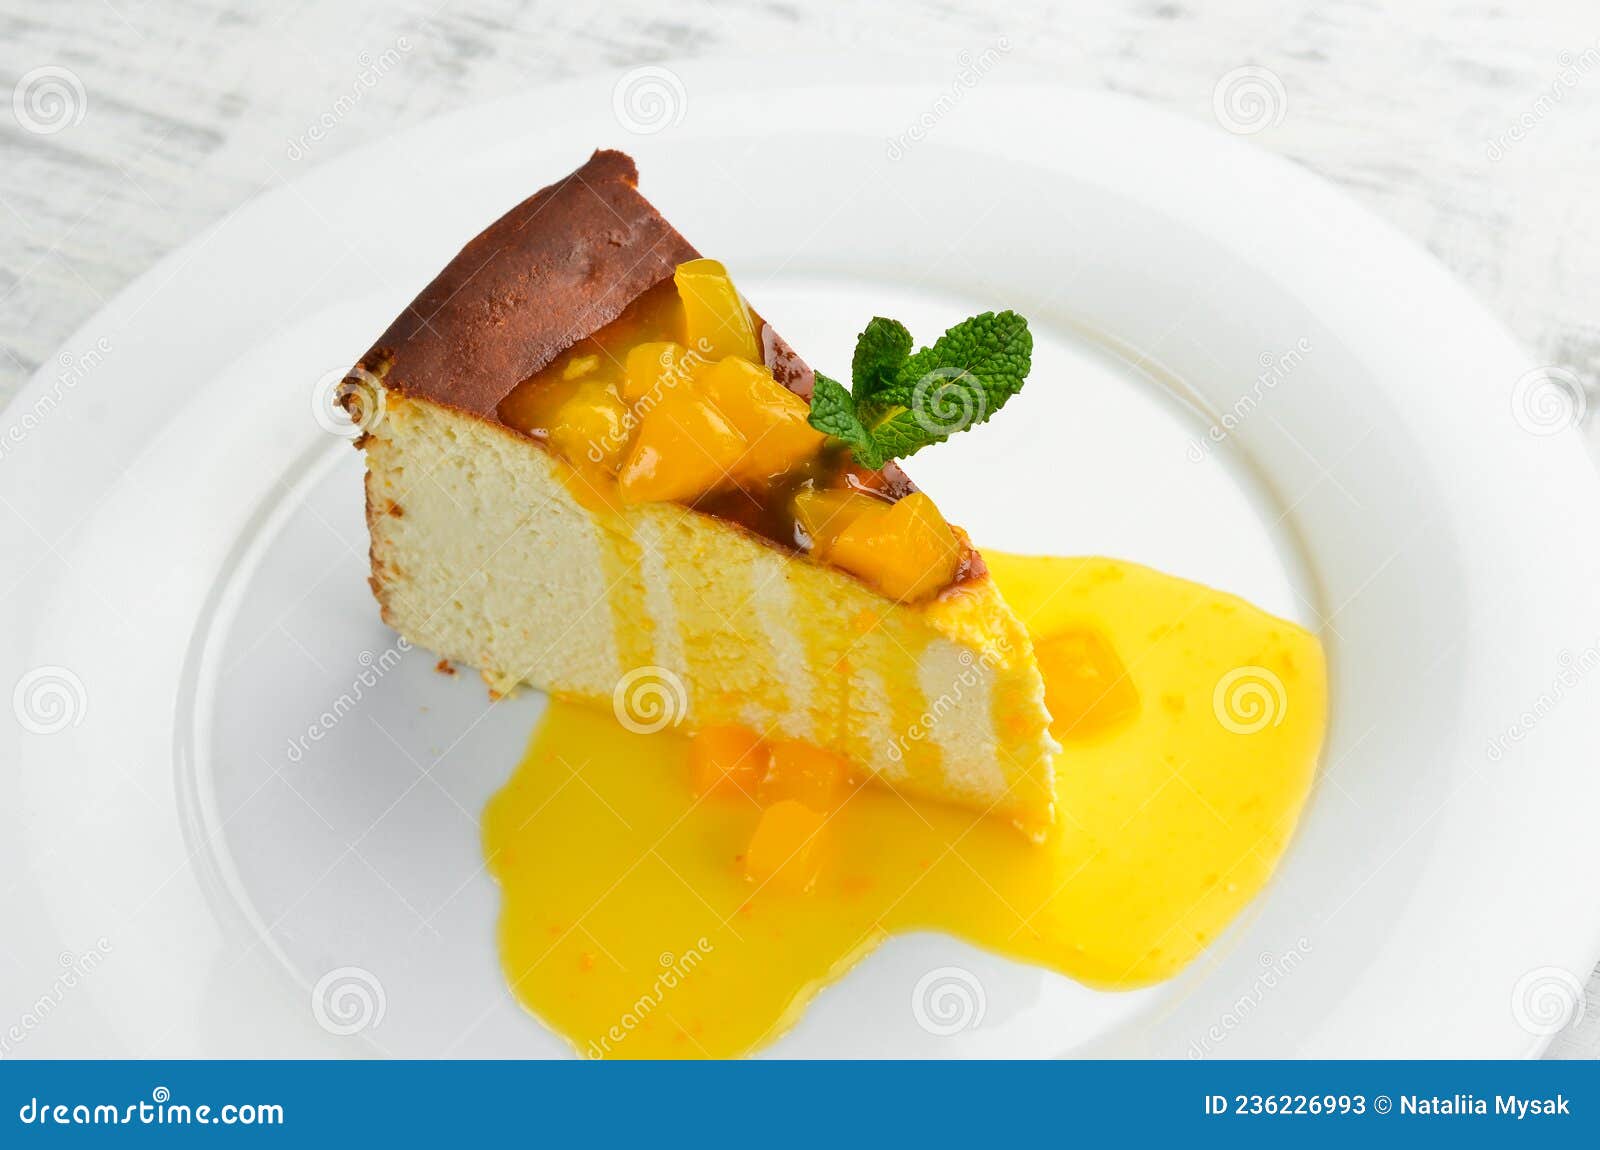 Dessert. Cheesecake with Fruit Topping on a Plate Stock Image - Image ...